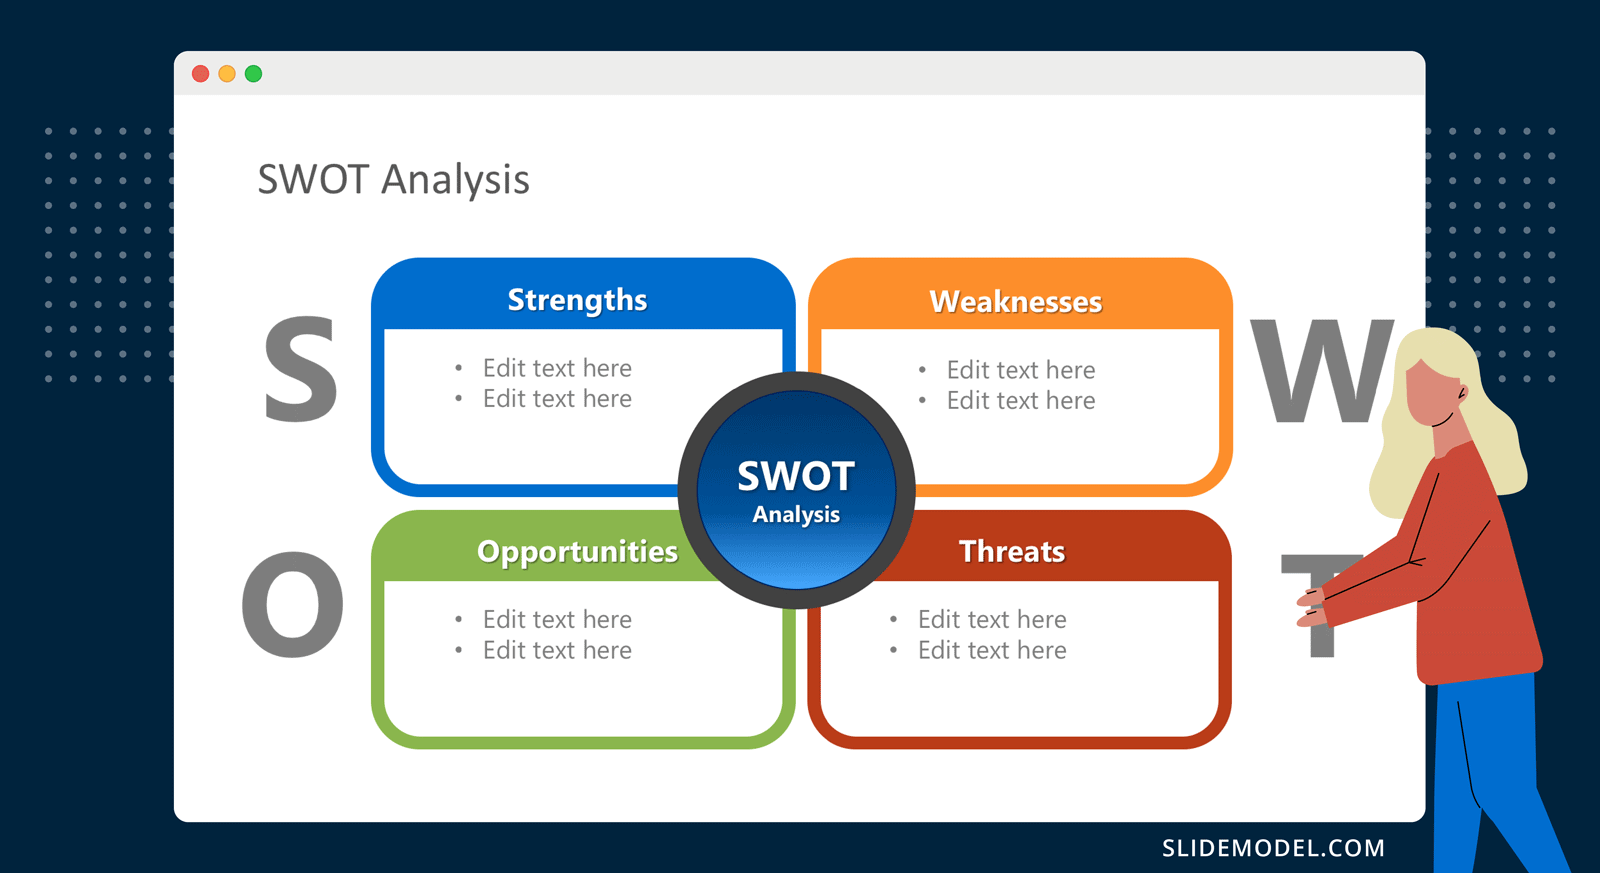 SWOT Analysis PowerPoint template